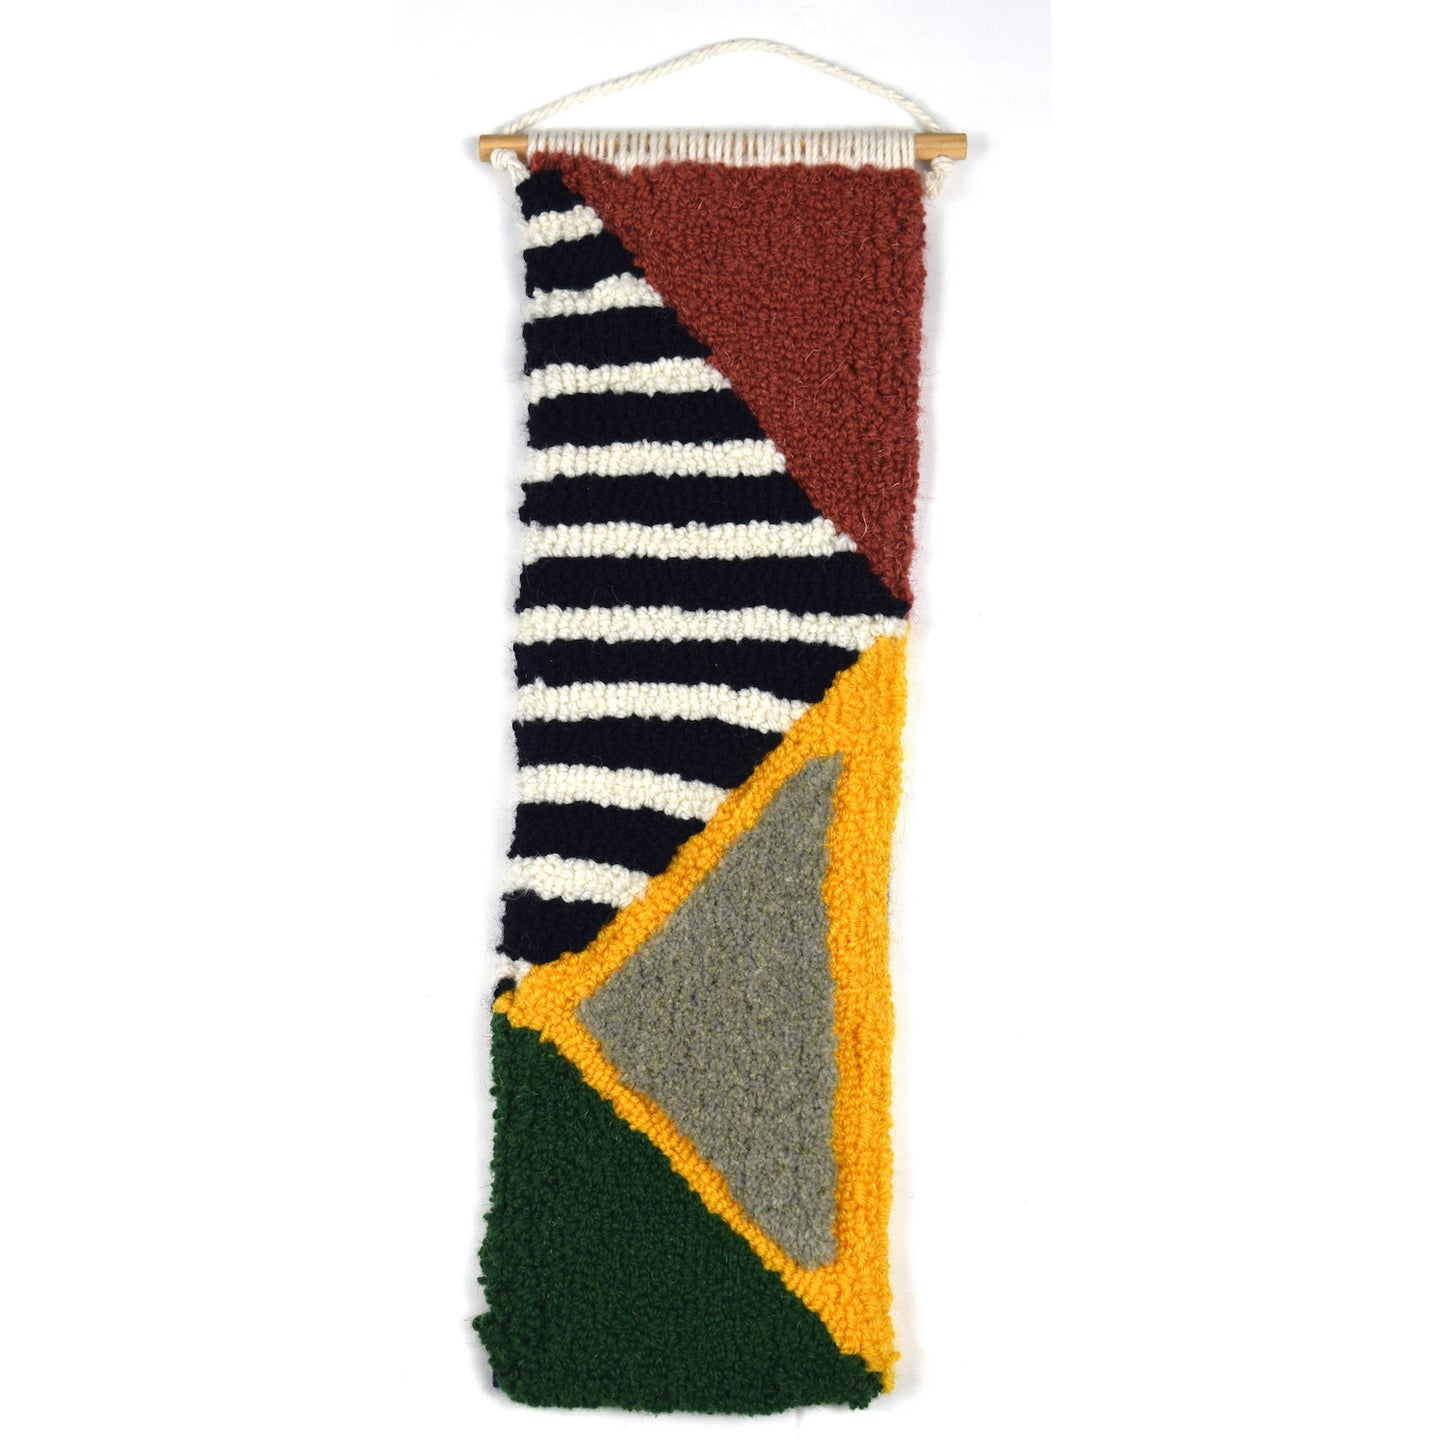 Wall Hanging using British Wool and Reclaimed Yarns.  A mixture of loop and cut piles.  Using Coral, Yellow, Khaki and Green Block Colours and a Black and White striped pattern to create and contemporary design..